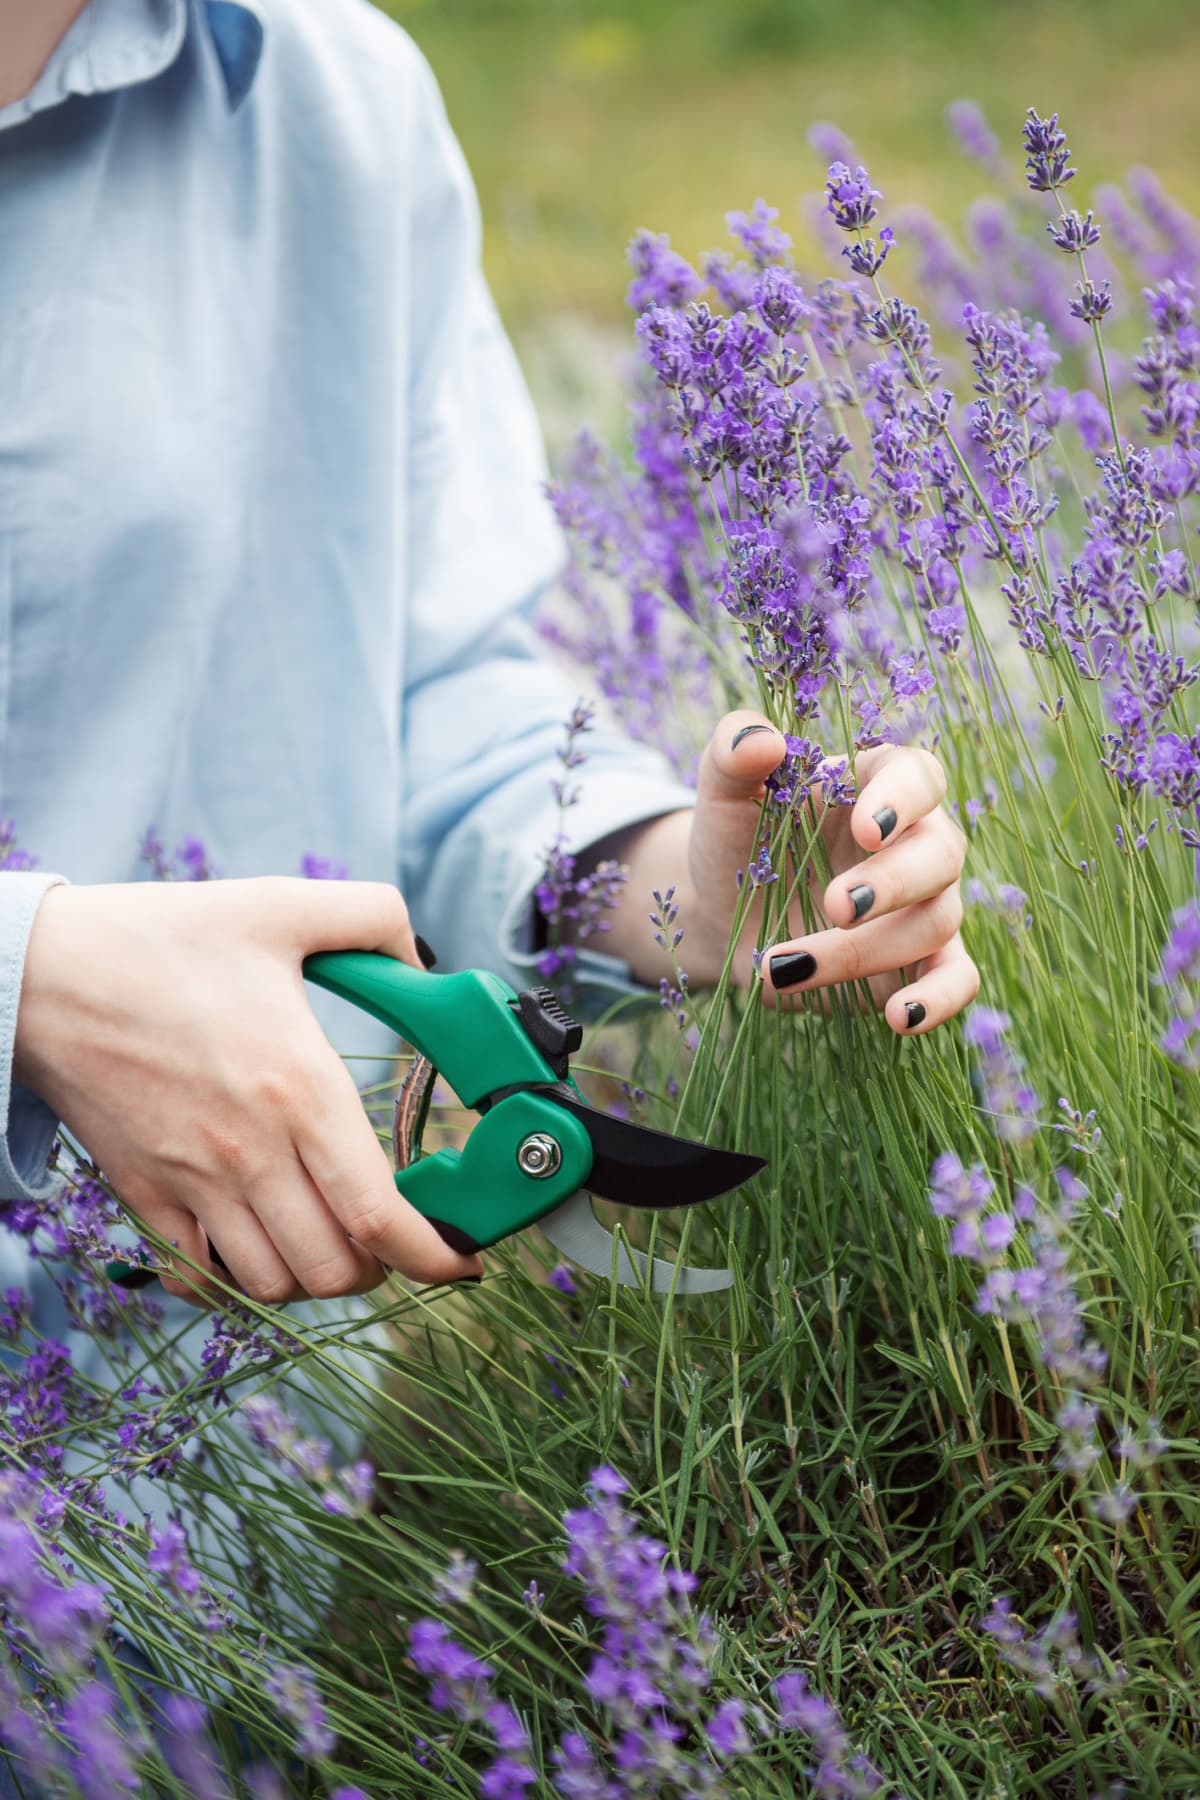 A young woman using a pruner to harvest lavender flowers